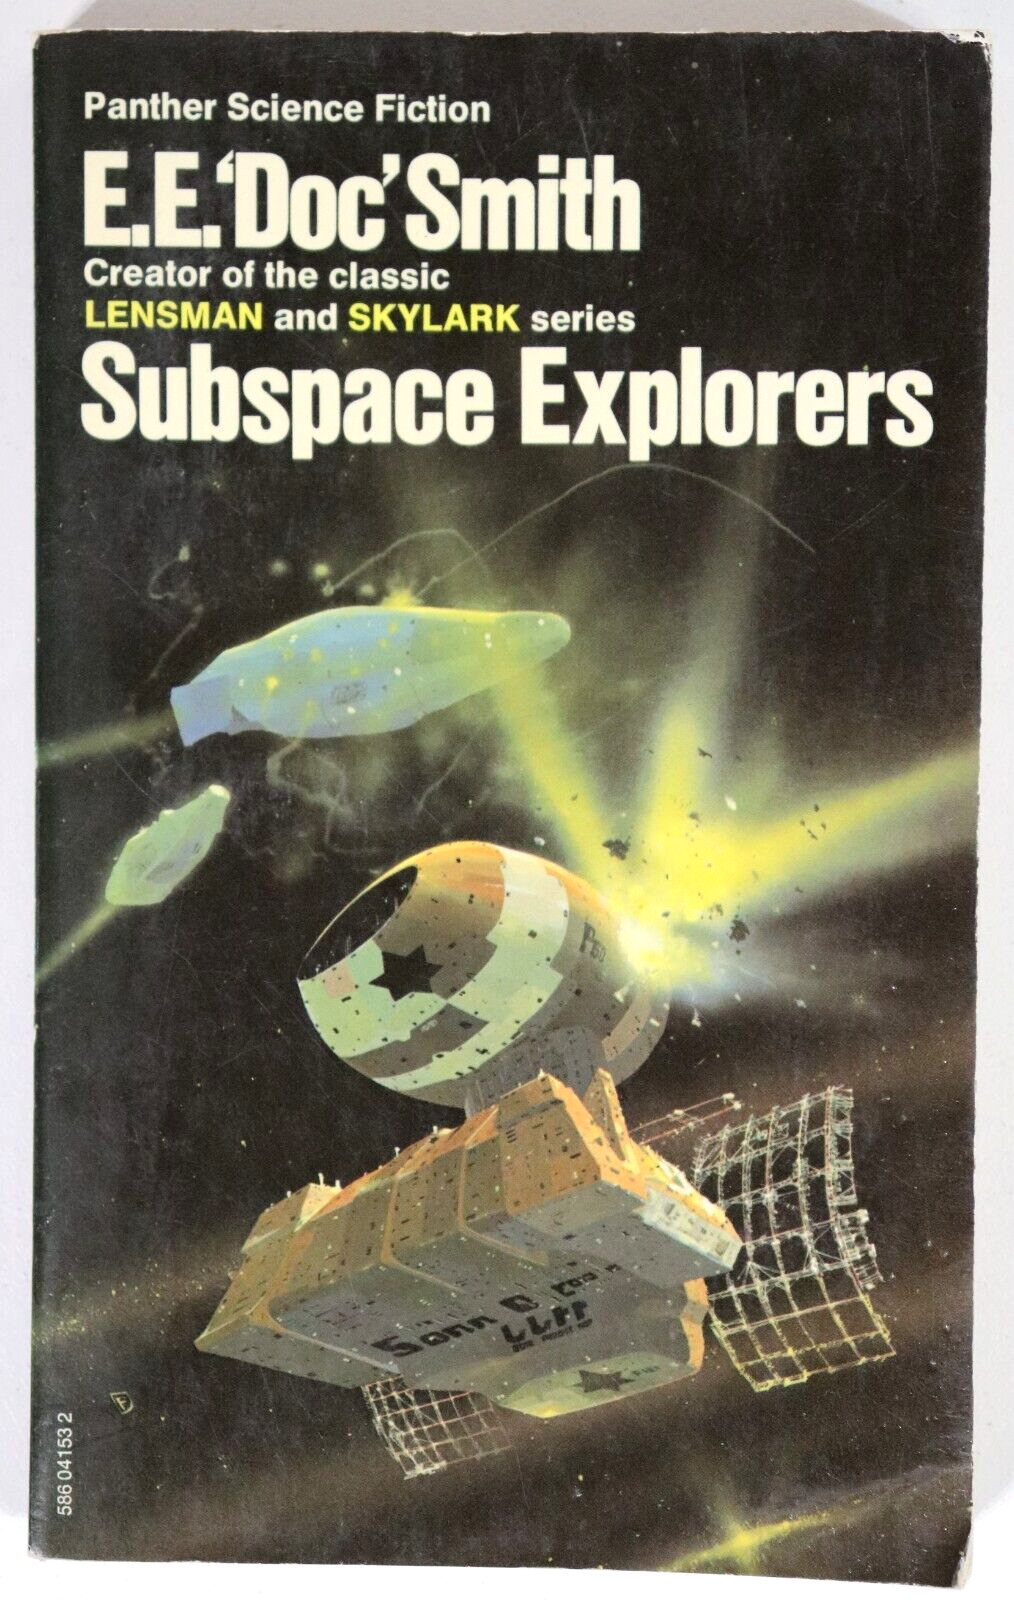 Subspace Explorers by E.E. 'Doc" Smith - 1975 - Vintage Science Fiction Book